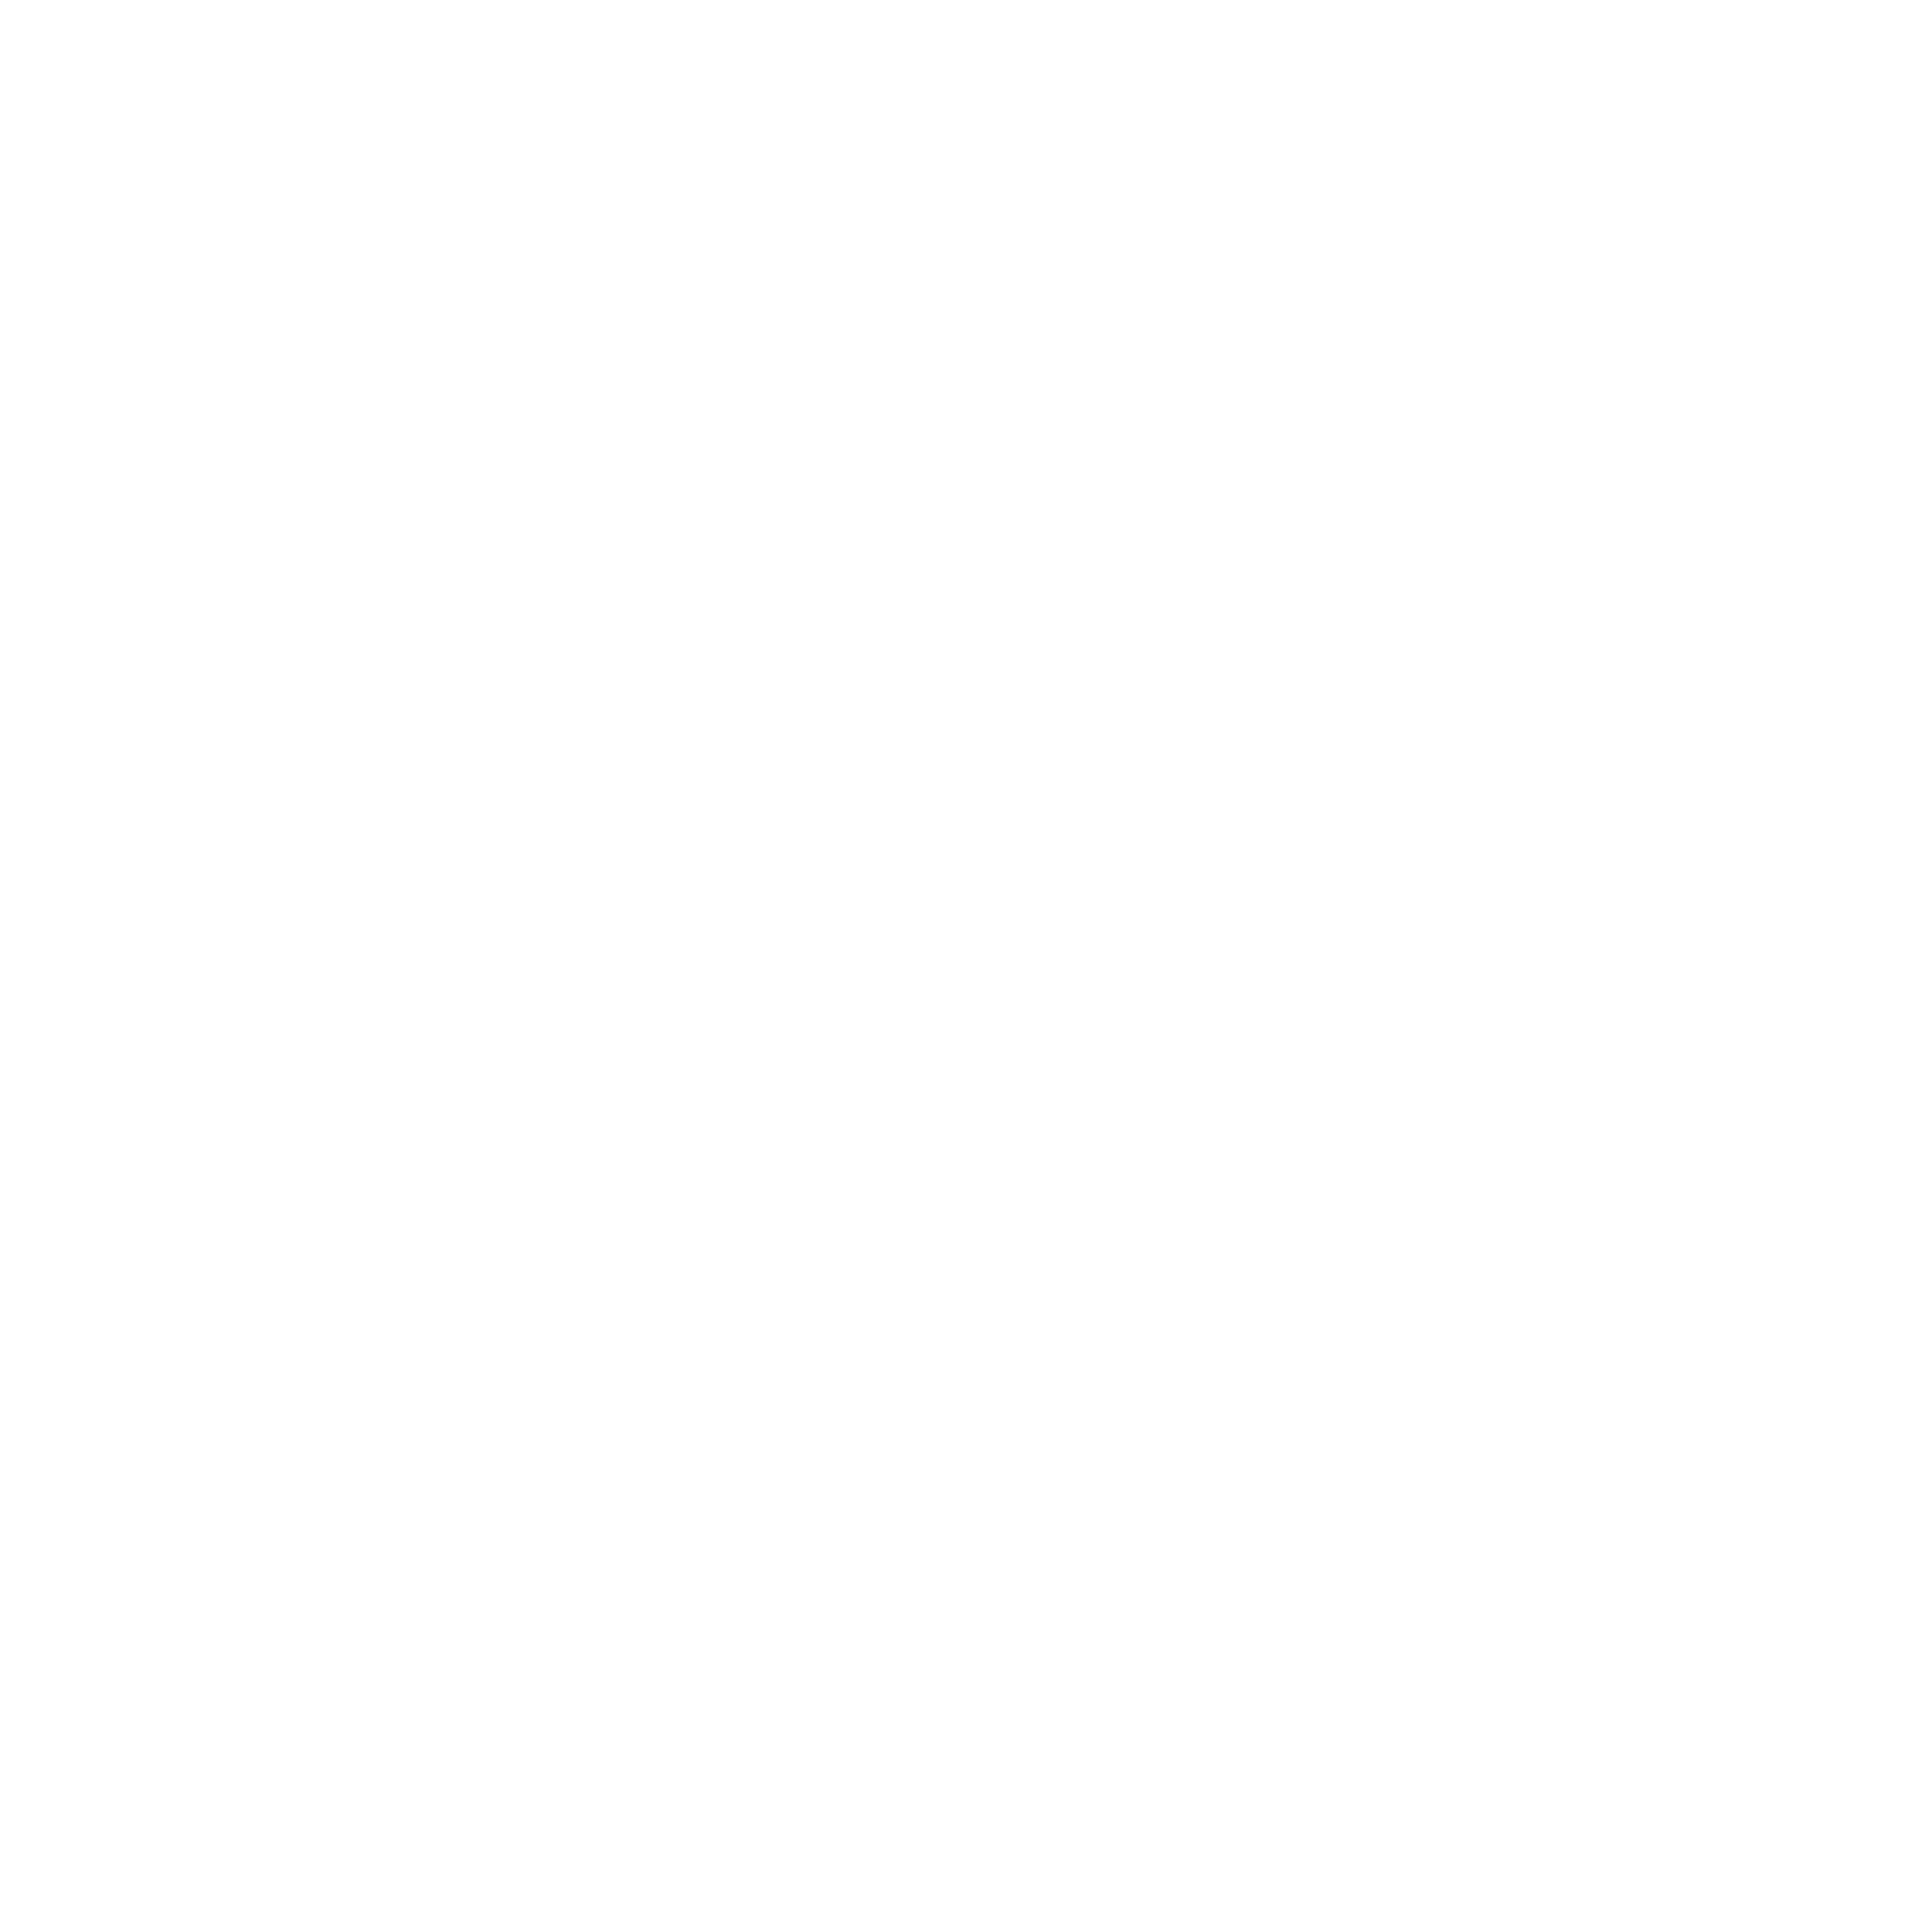 OLD NEW RECORDS